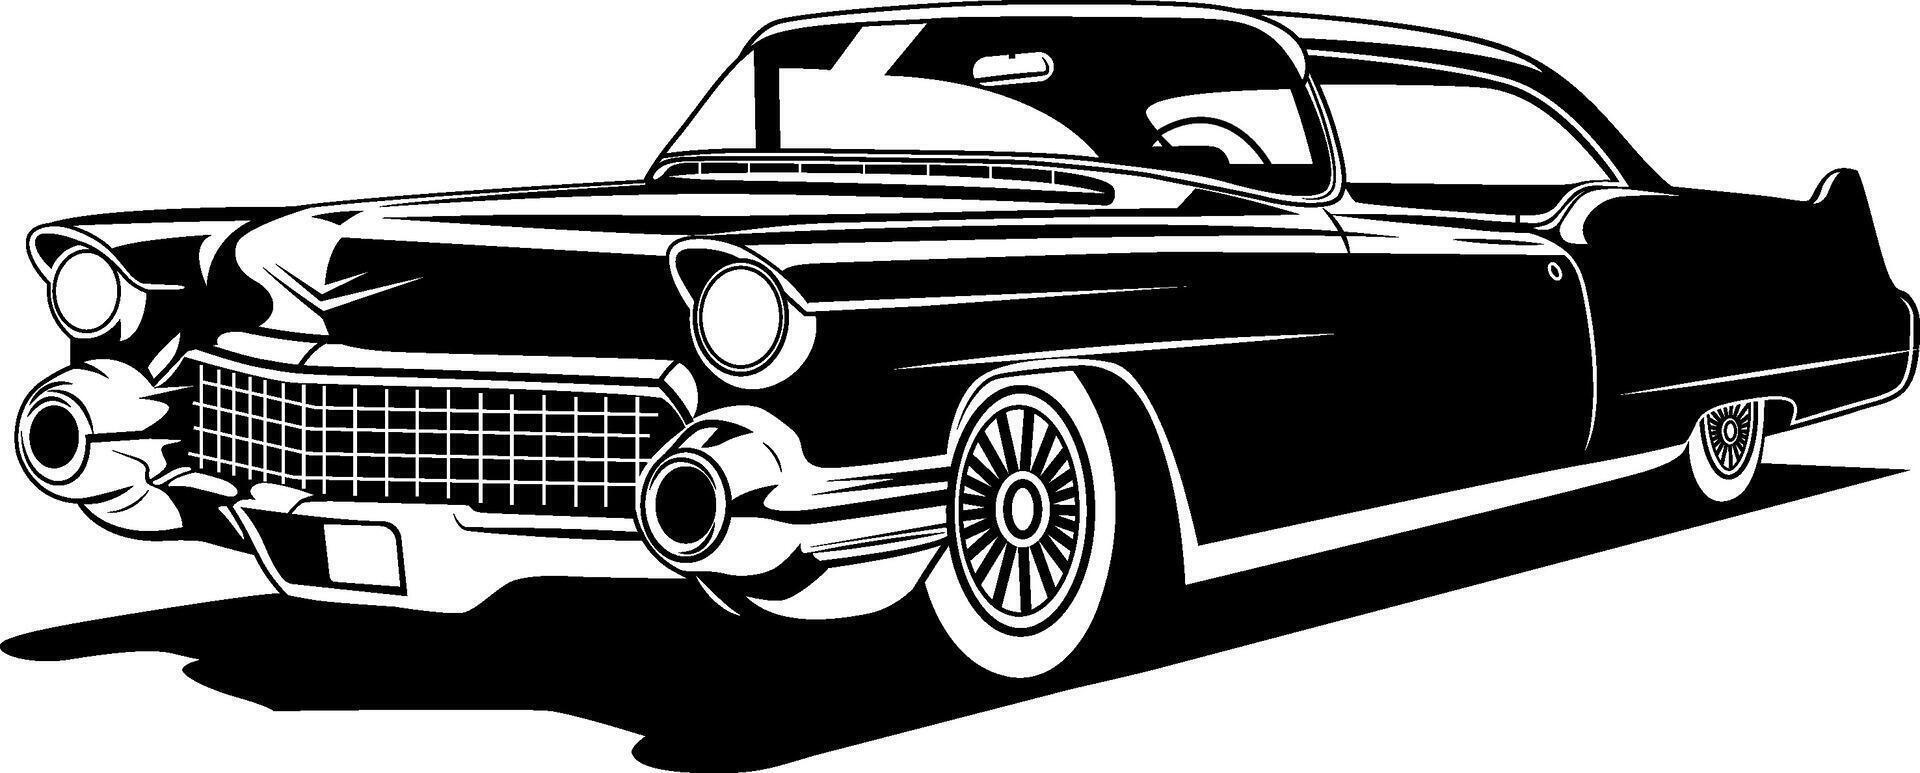 A black and white drawing of a vintage classic car in monochrome style vector